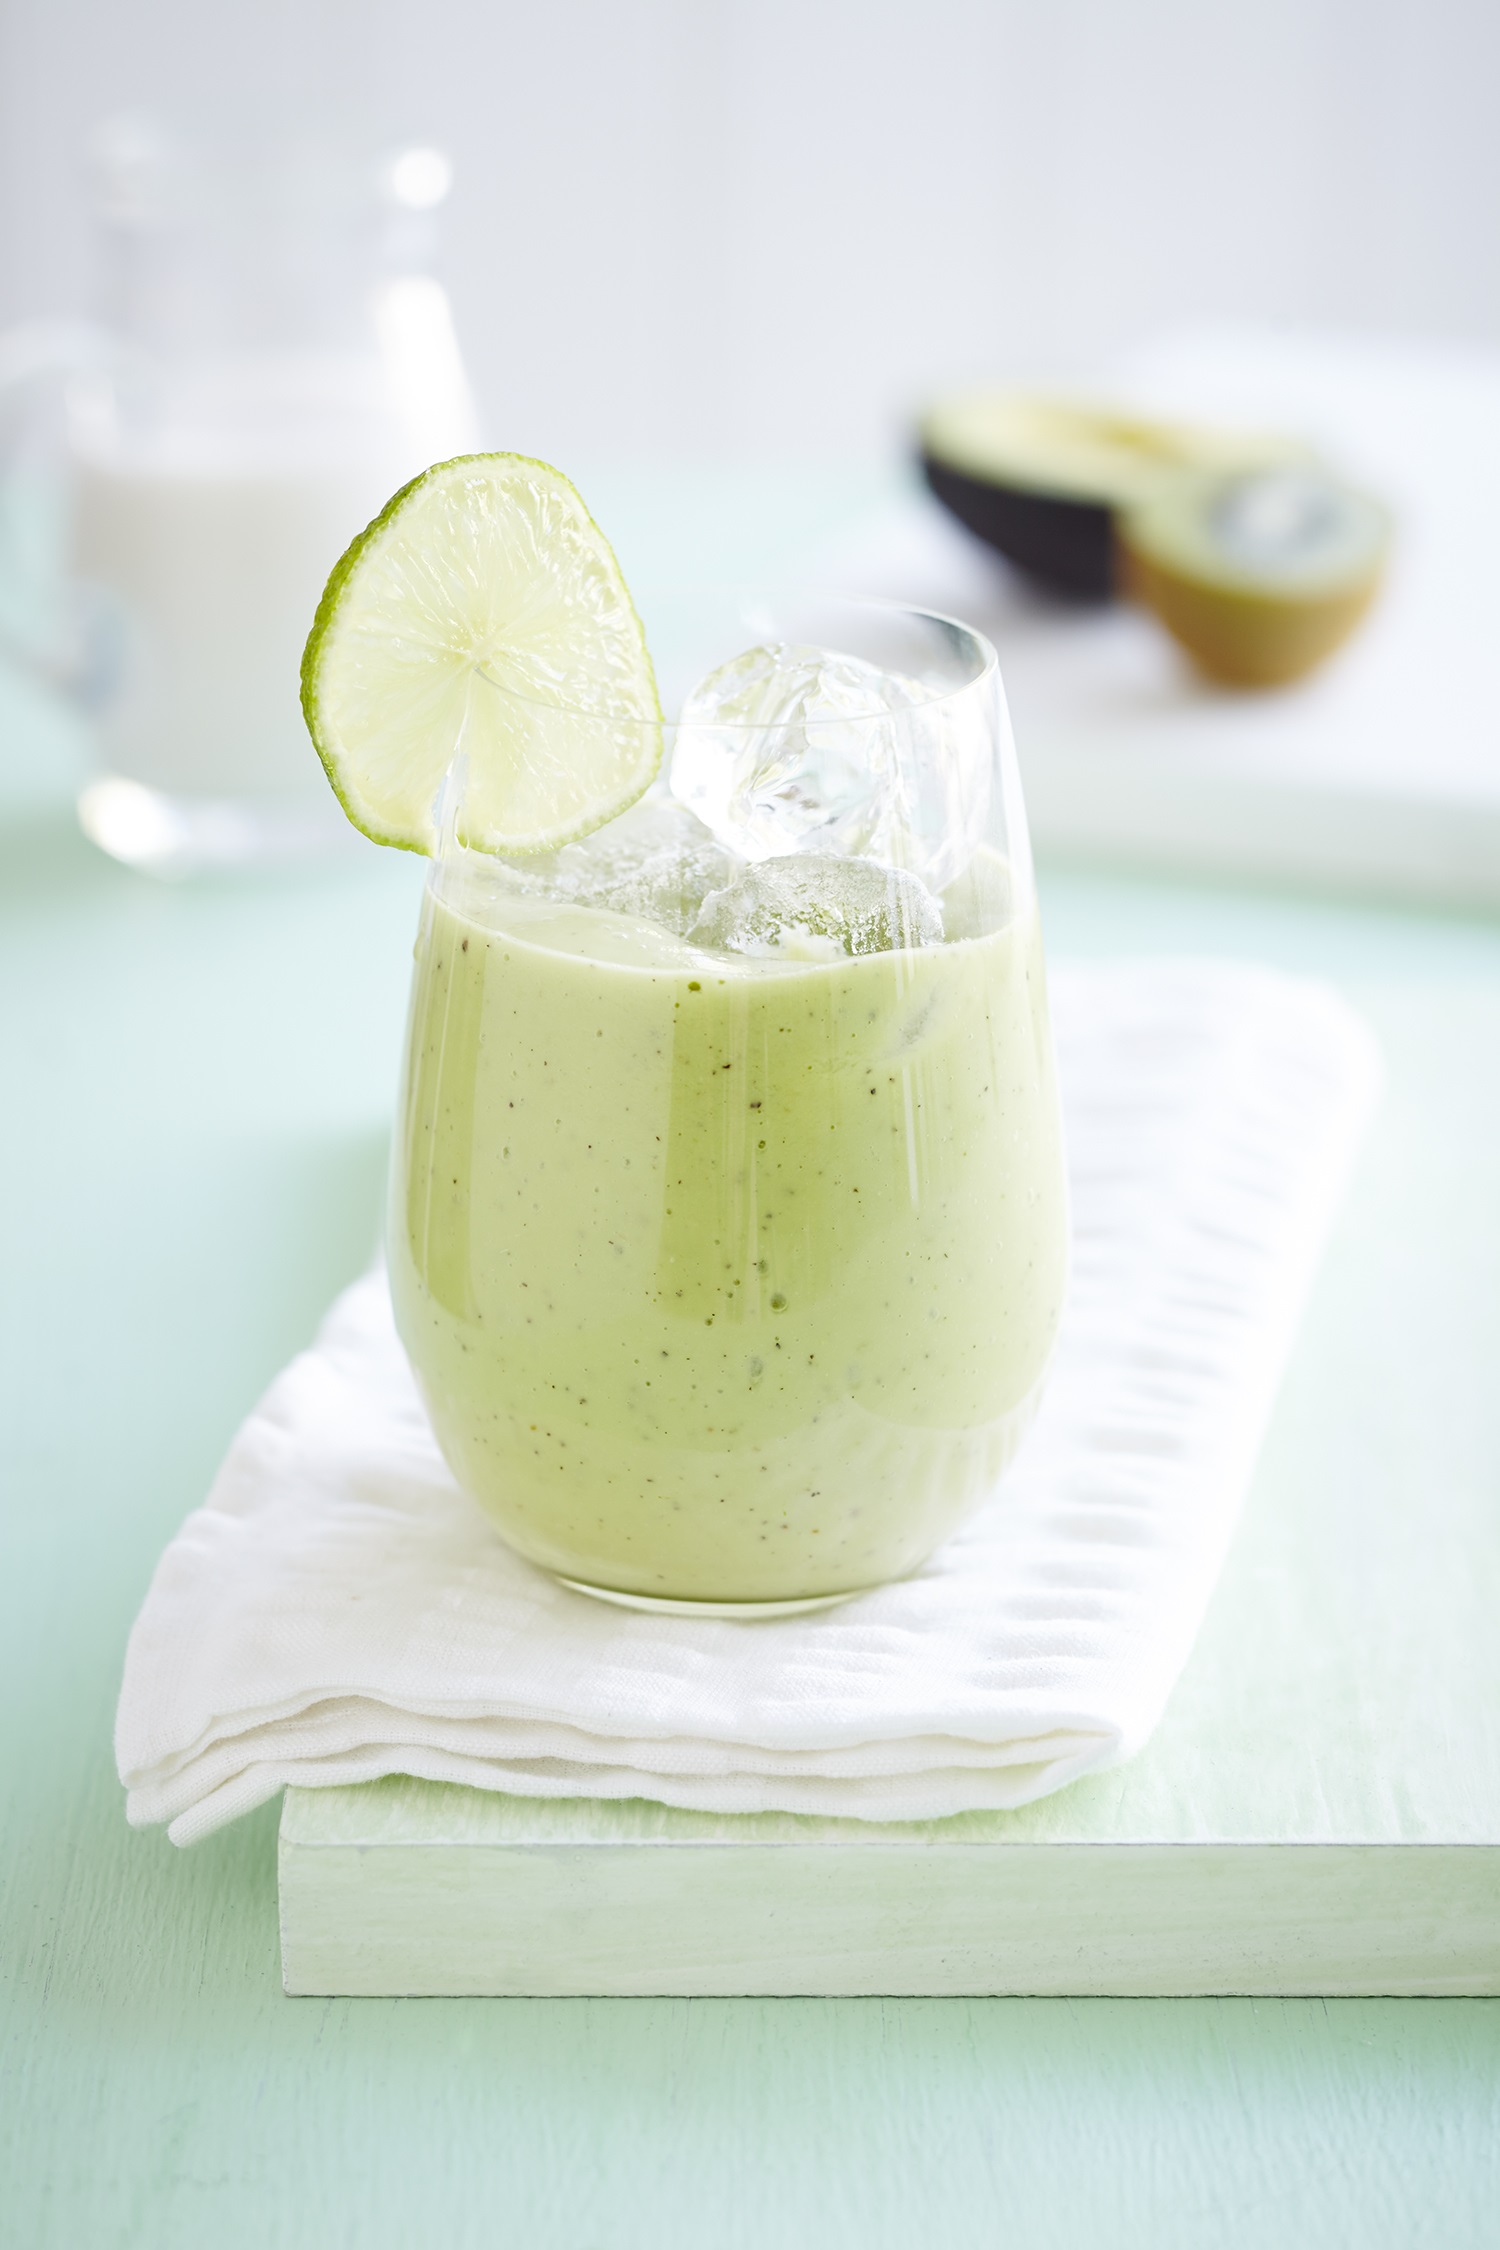 Citrus and Avocado smoothie without product